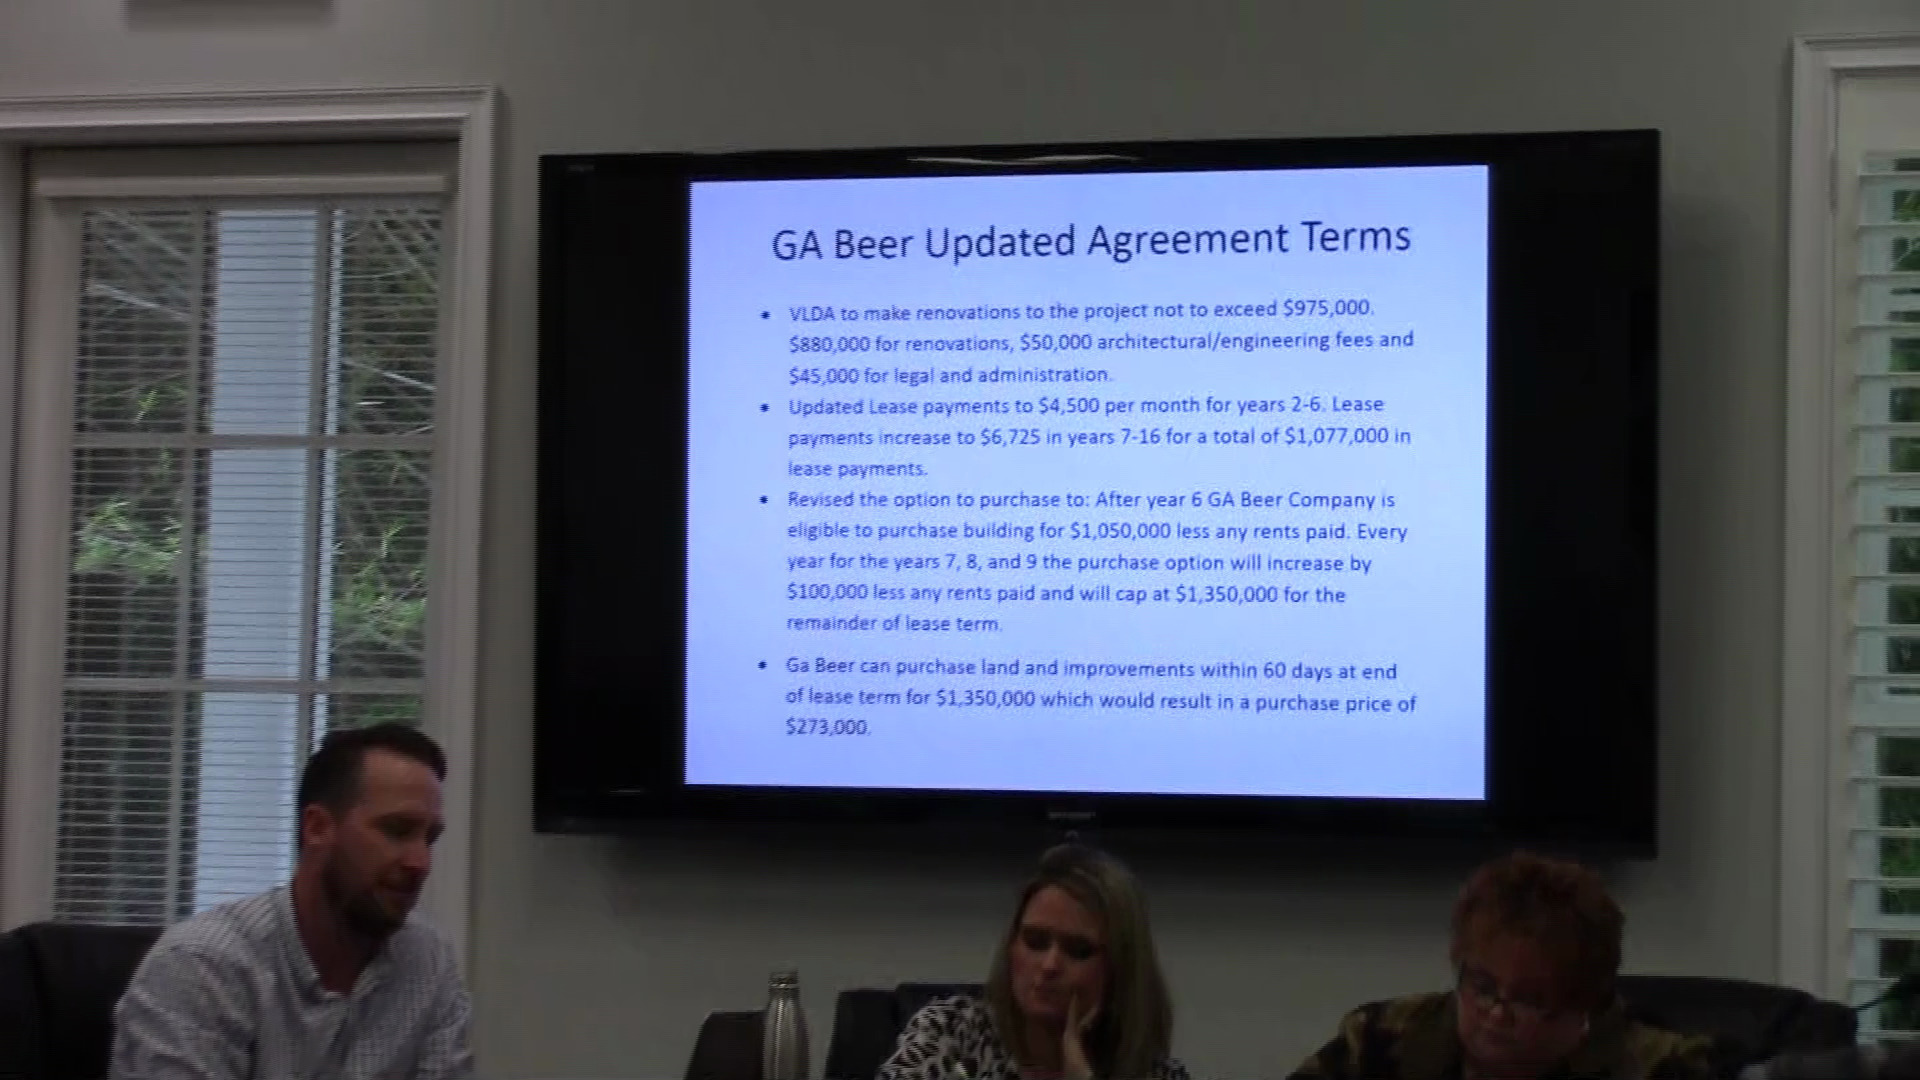 GA Beer Updated Agreement Terms